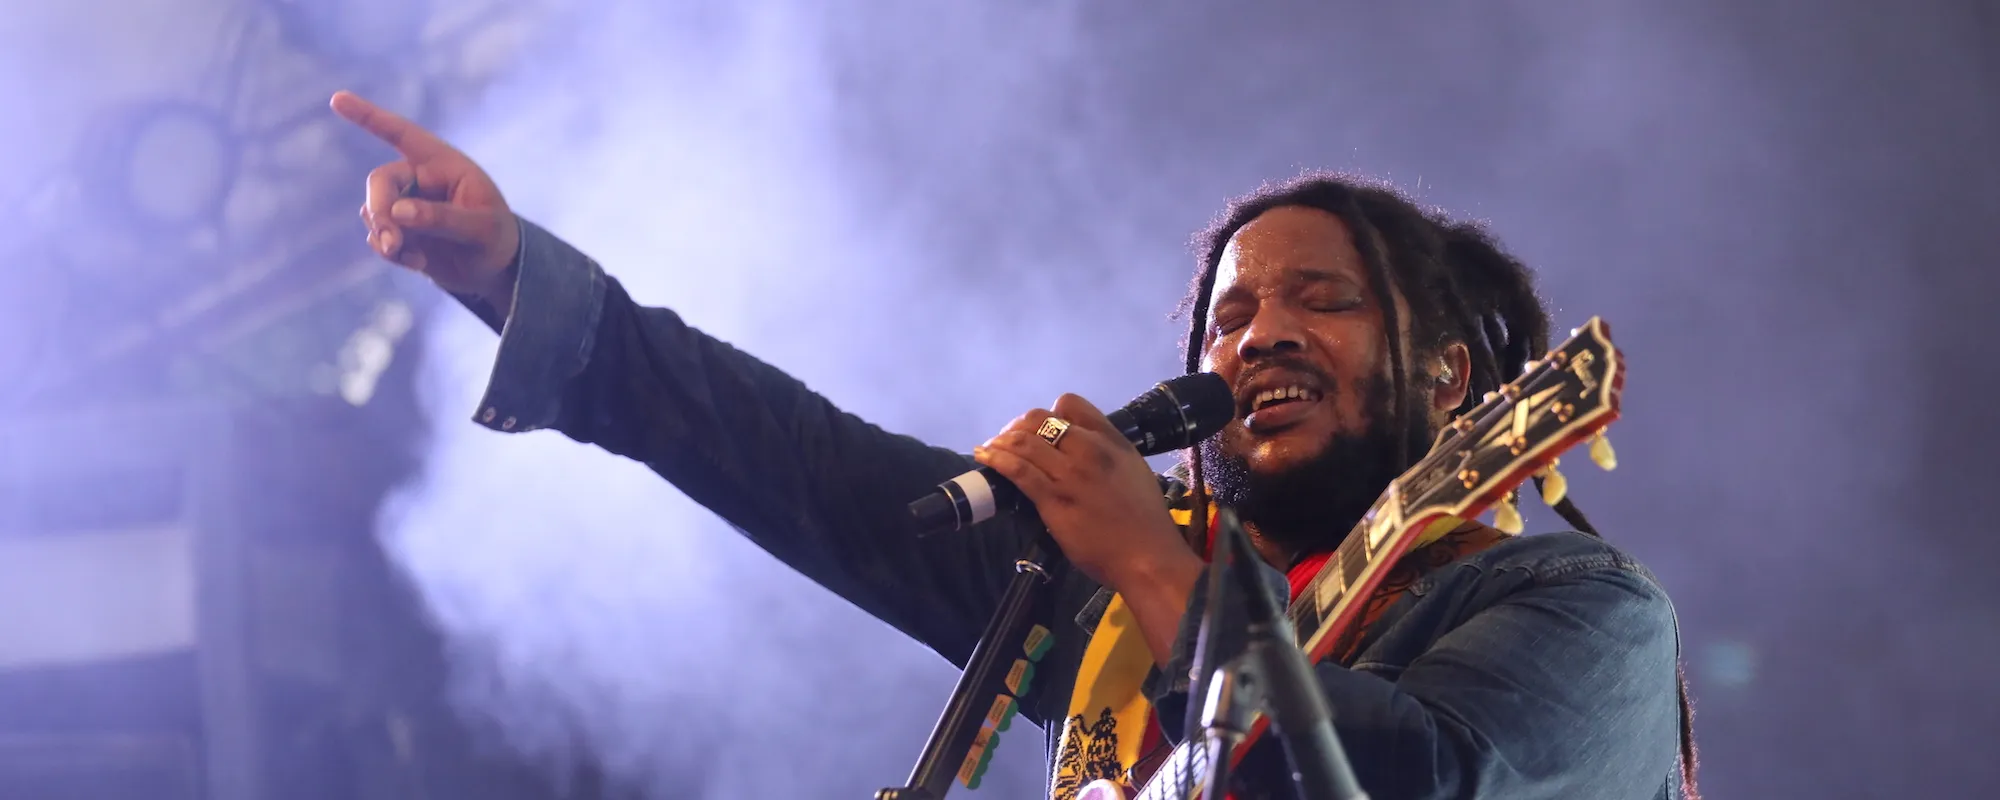 Stephen Marley Remembers Father, Those That Came Before on “Old Soul”